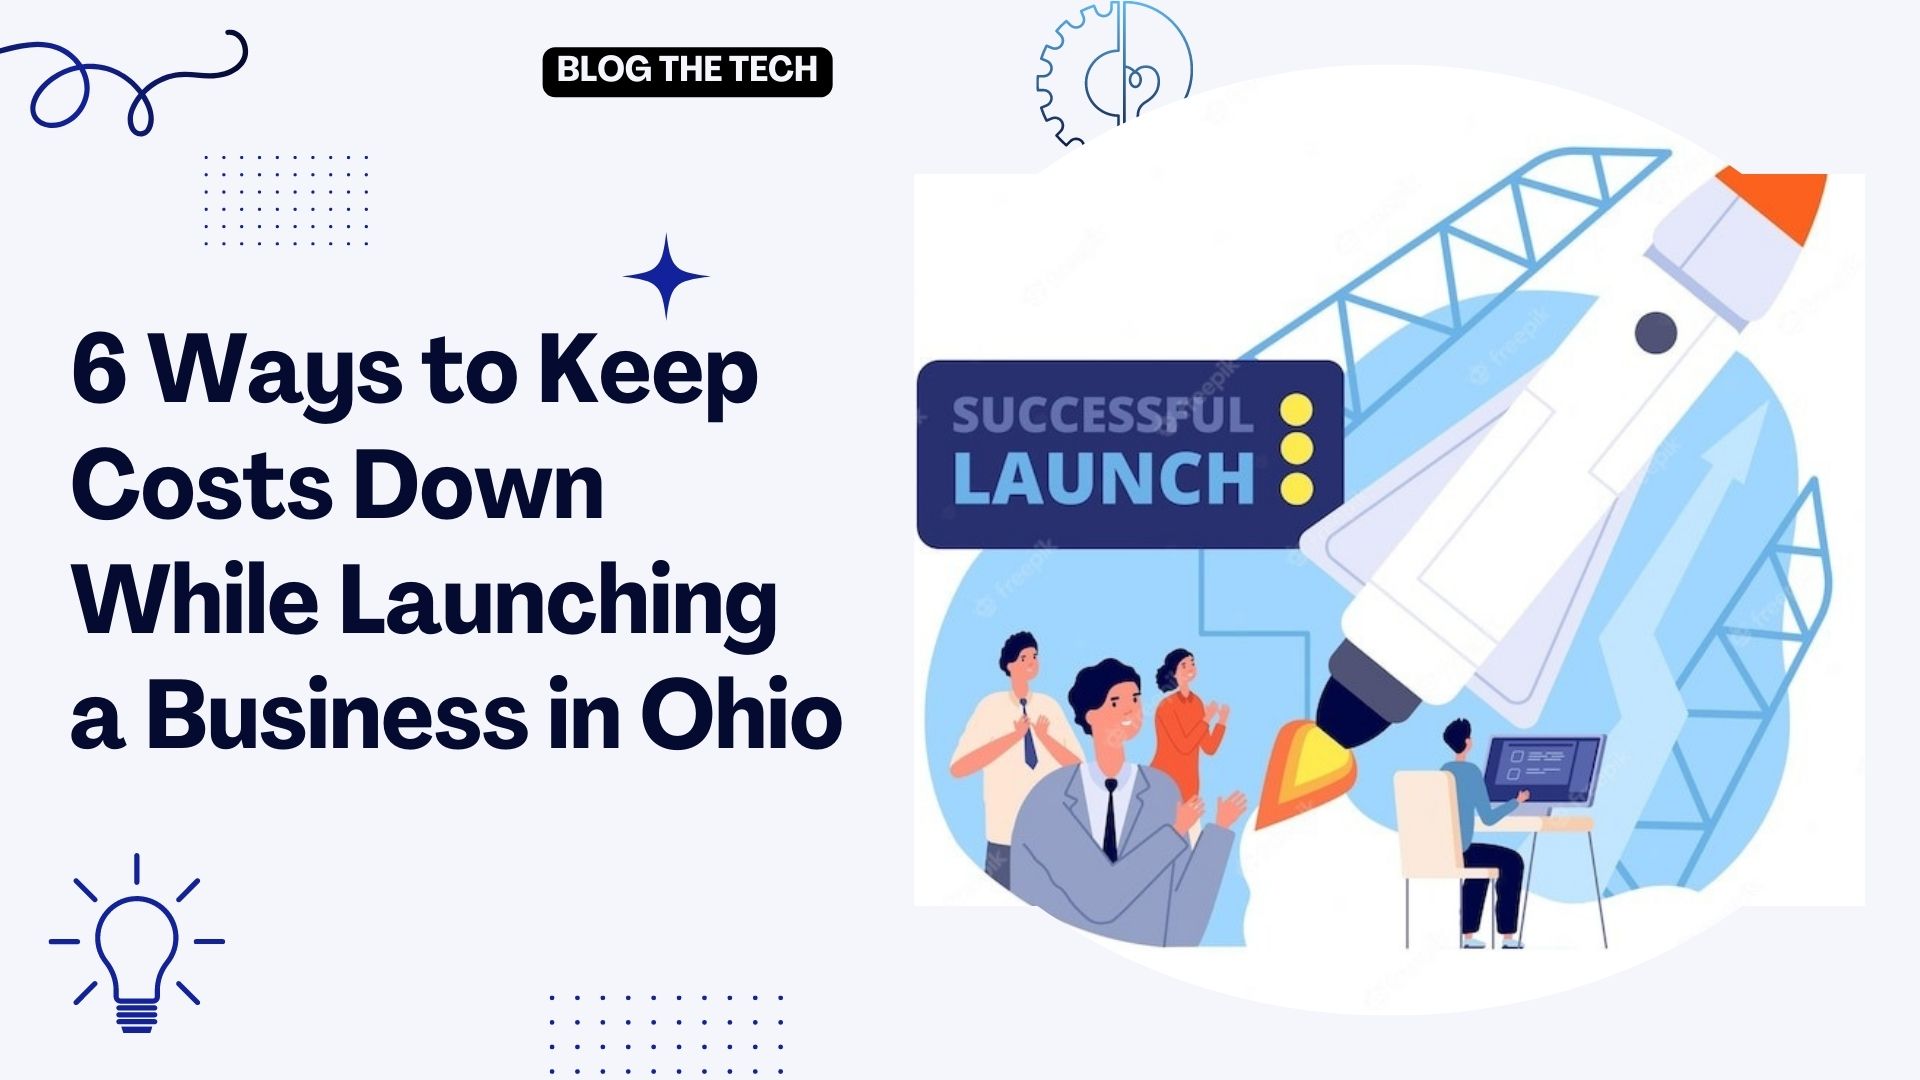 6-ways-to-keep-costs-down-while-launching-a-business-in-ohio-featured